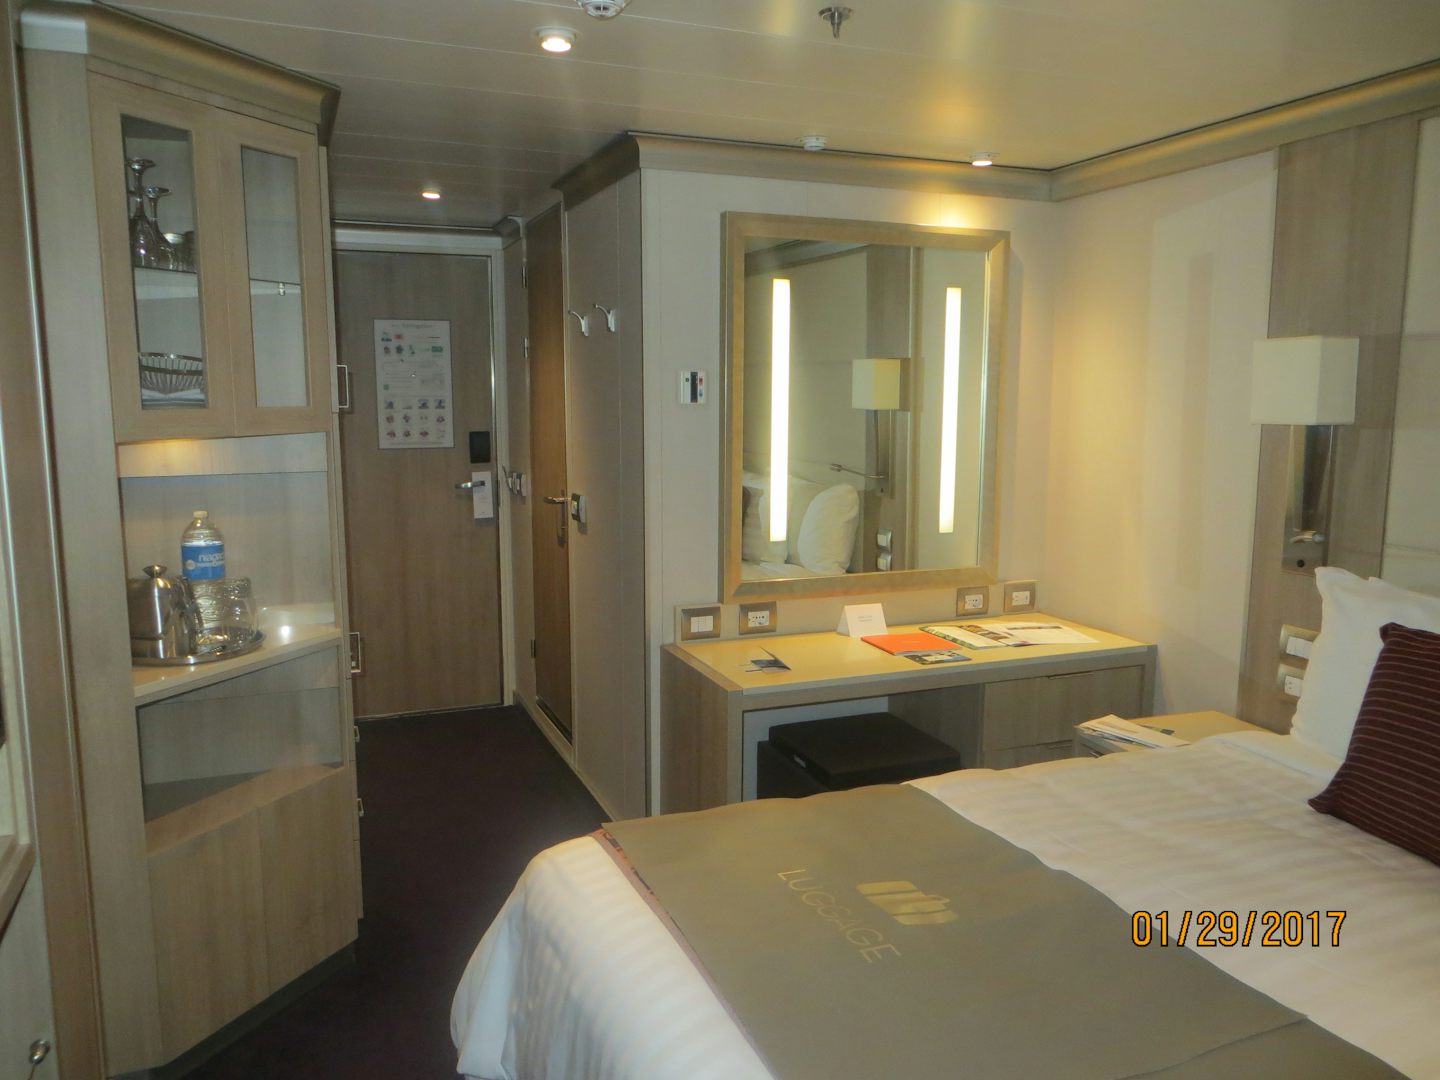 Another picture of the inside cabin